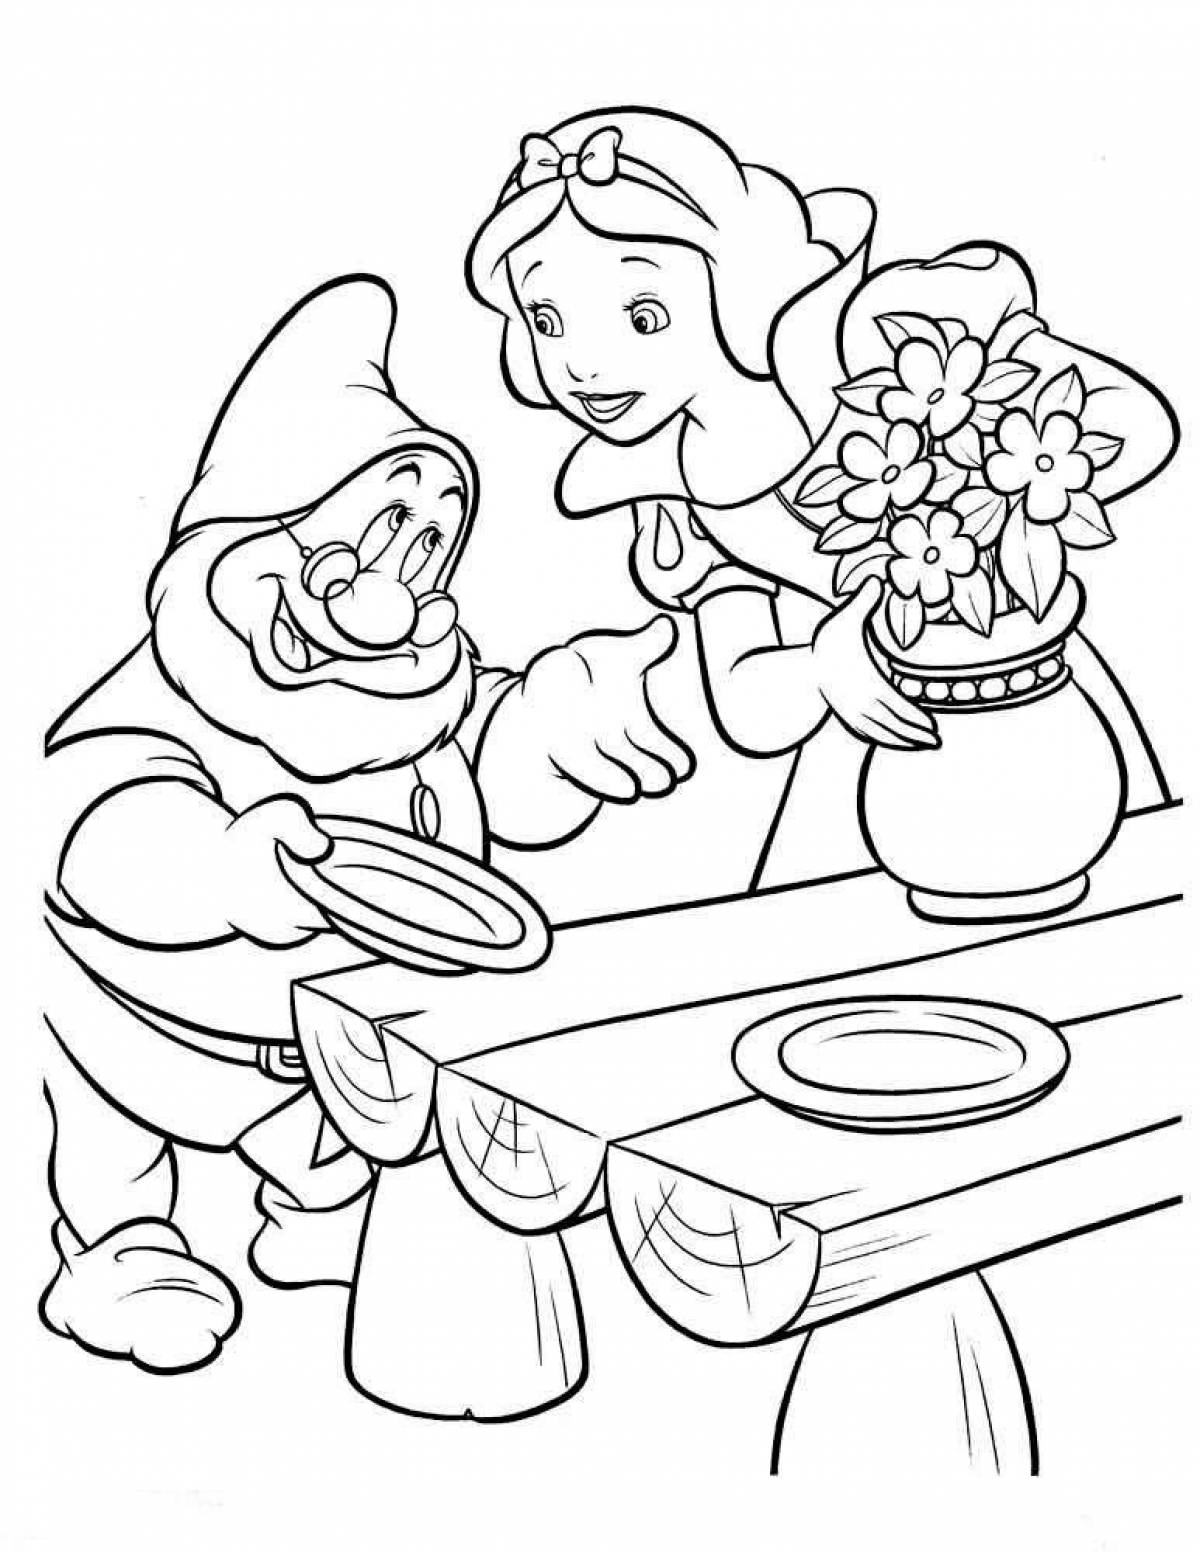 Snow White and the 7 Dwarfs coloring page